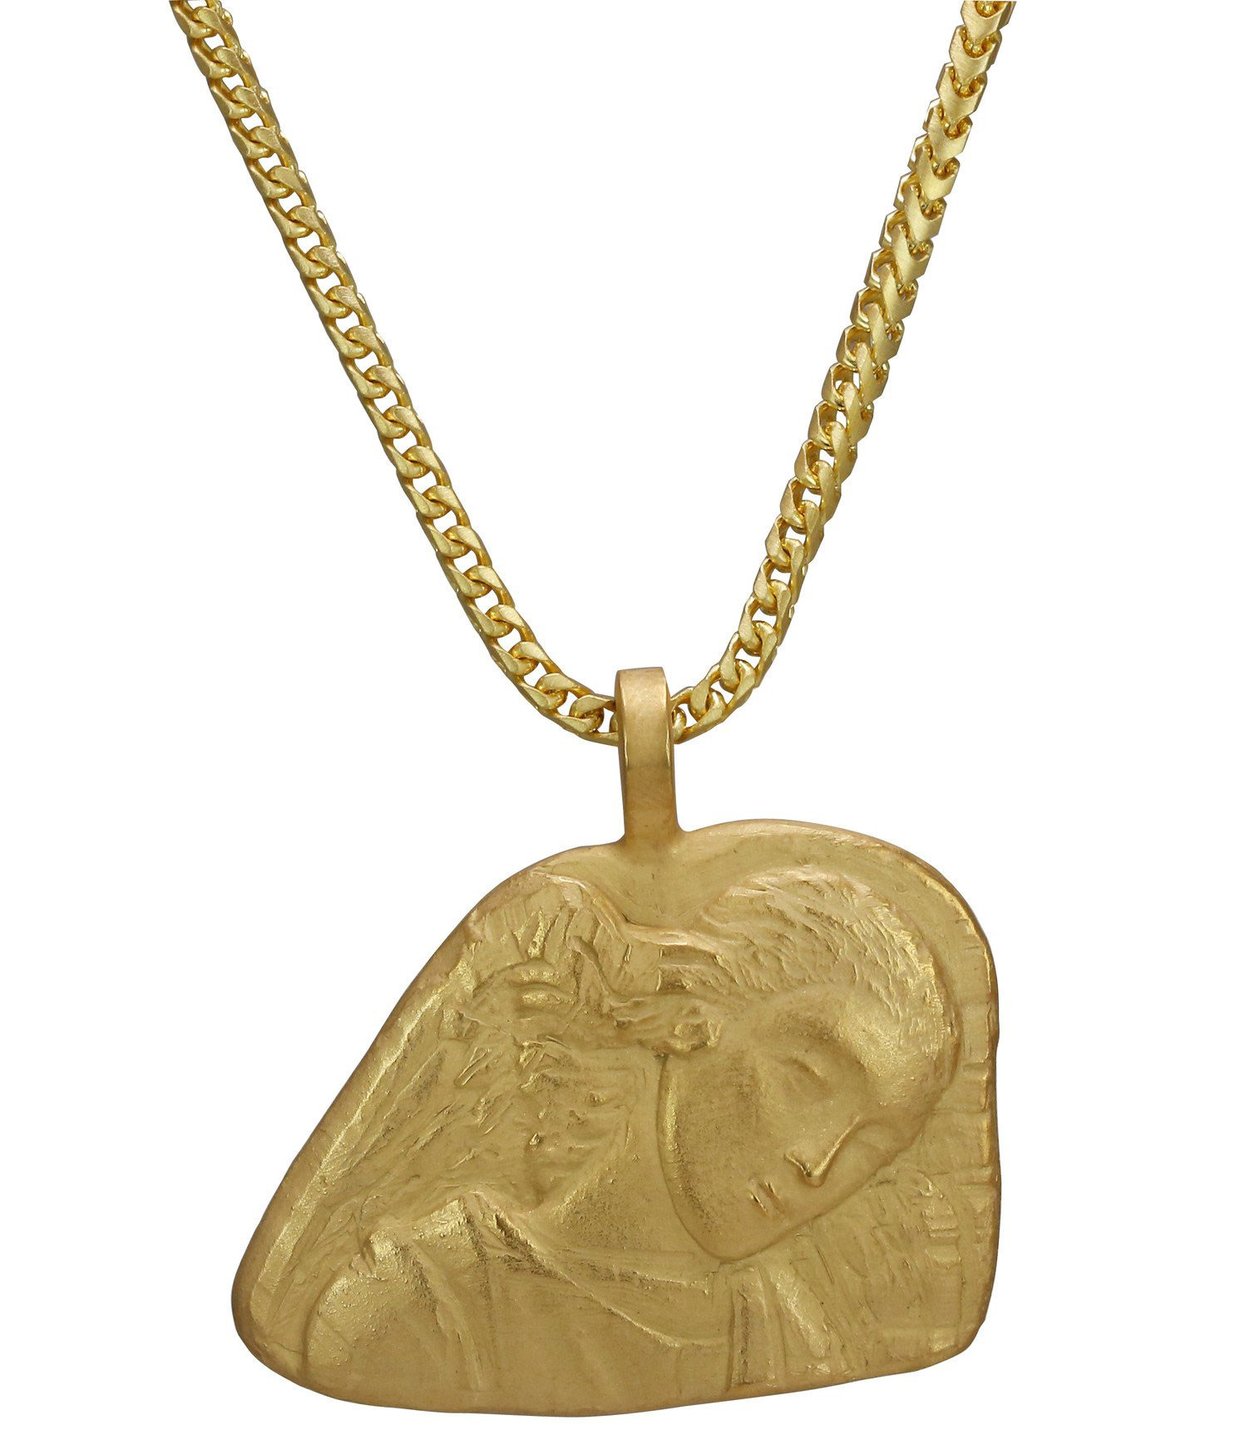 One of the Renaissance-inspired pieces from Kanye West's new Yeezy jewellery collection, at yeezysupply.com